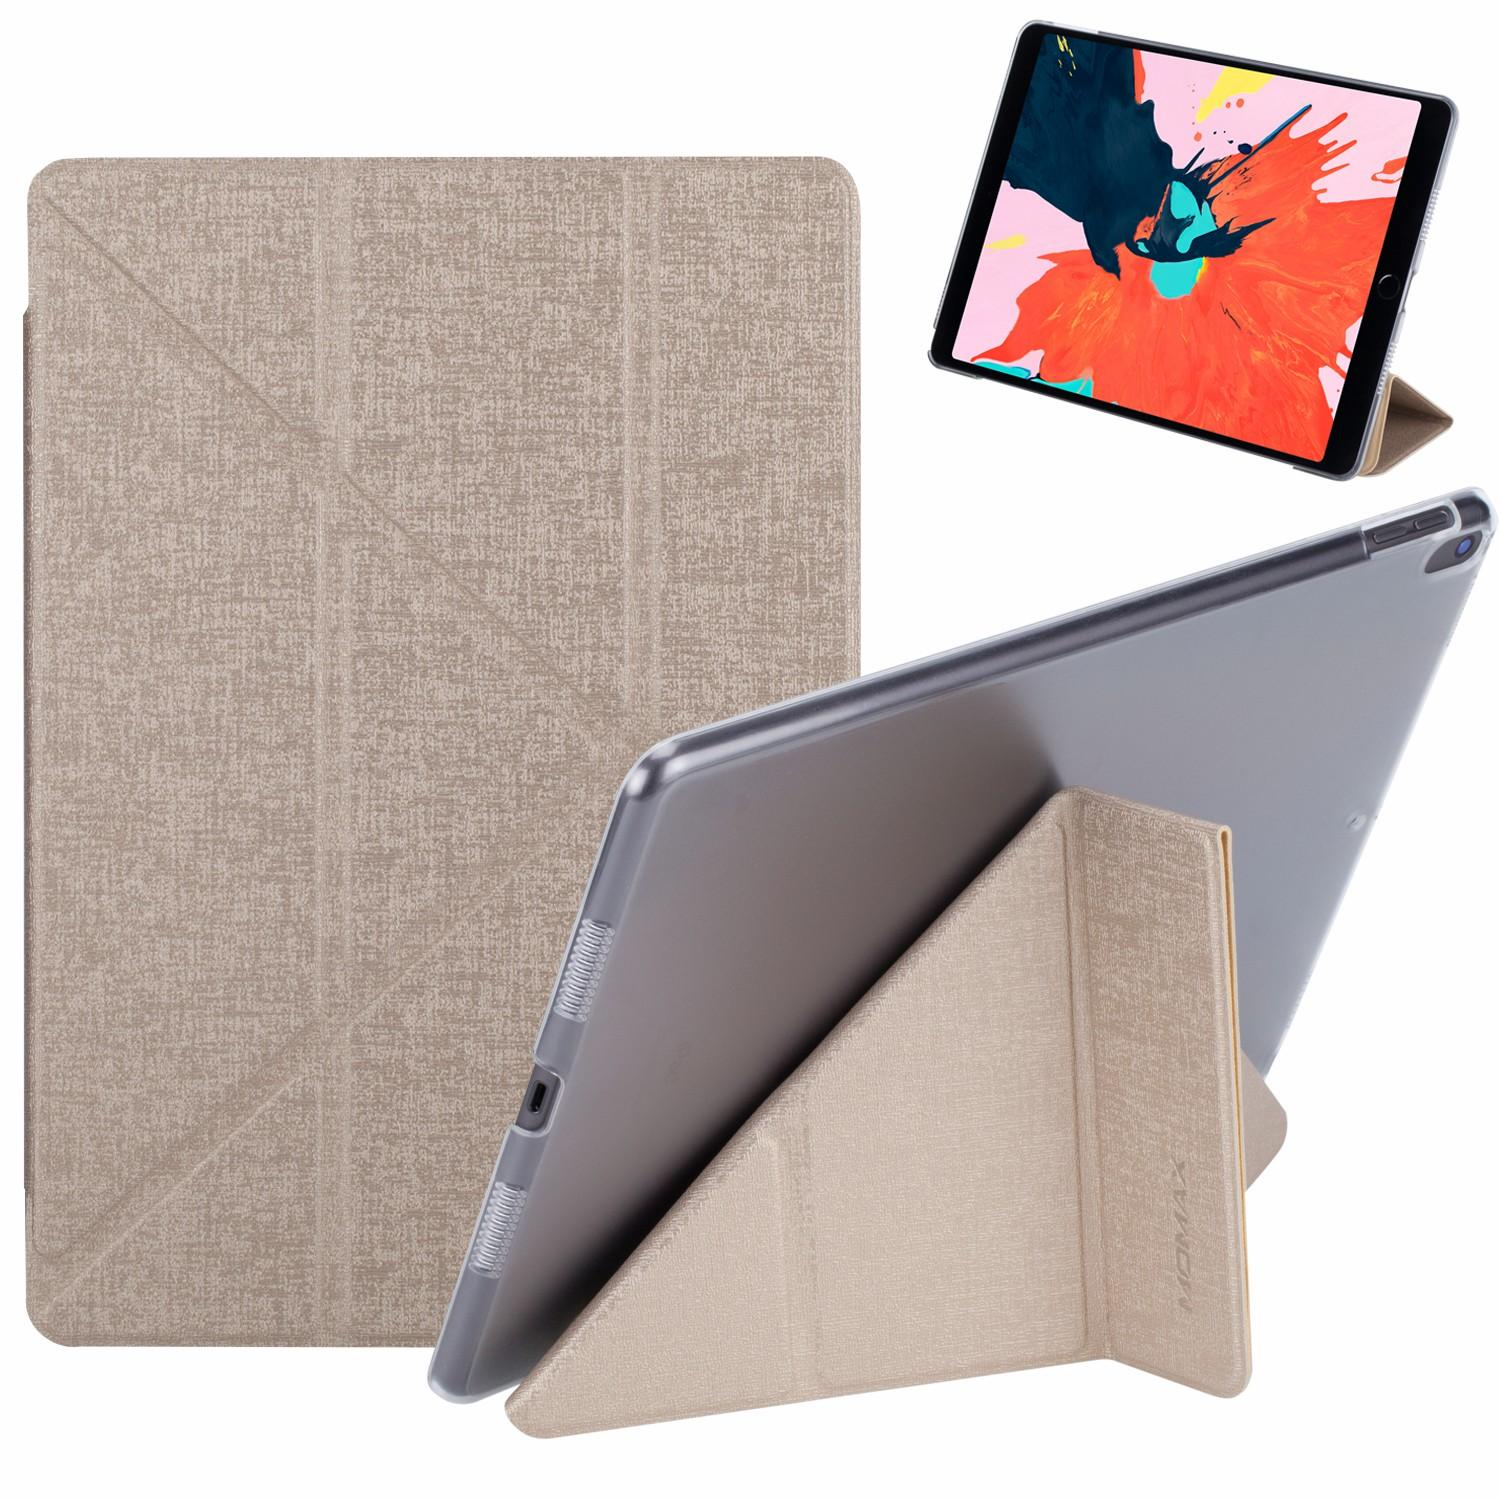 Origami Tablet Case Momax Origami Stand Leather Smart Tablet Cover For Ipad Air 105 Inch 2019